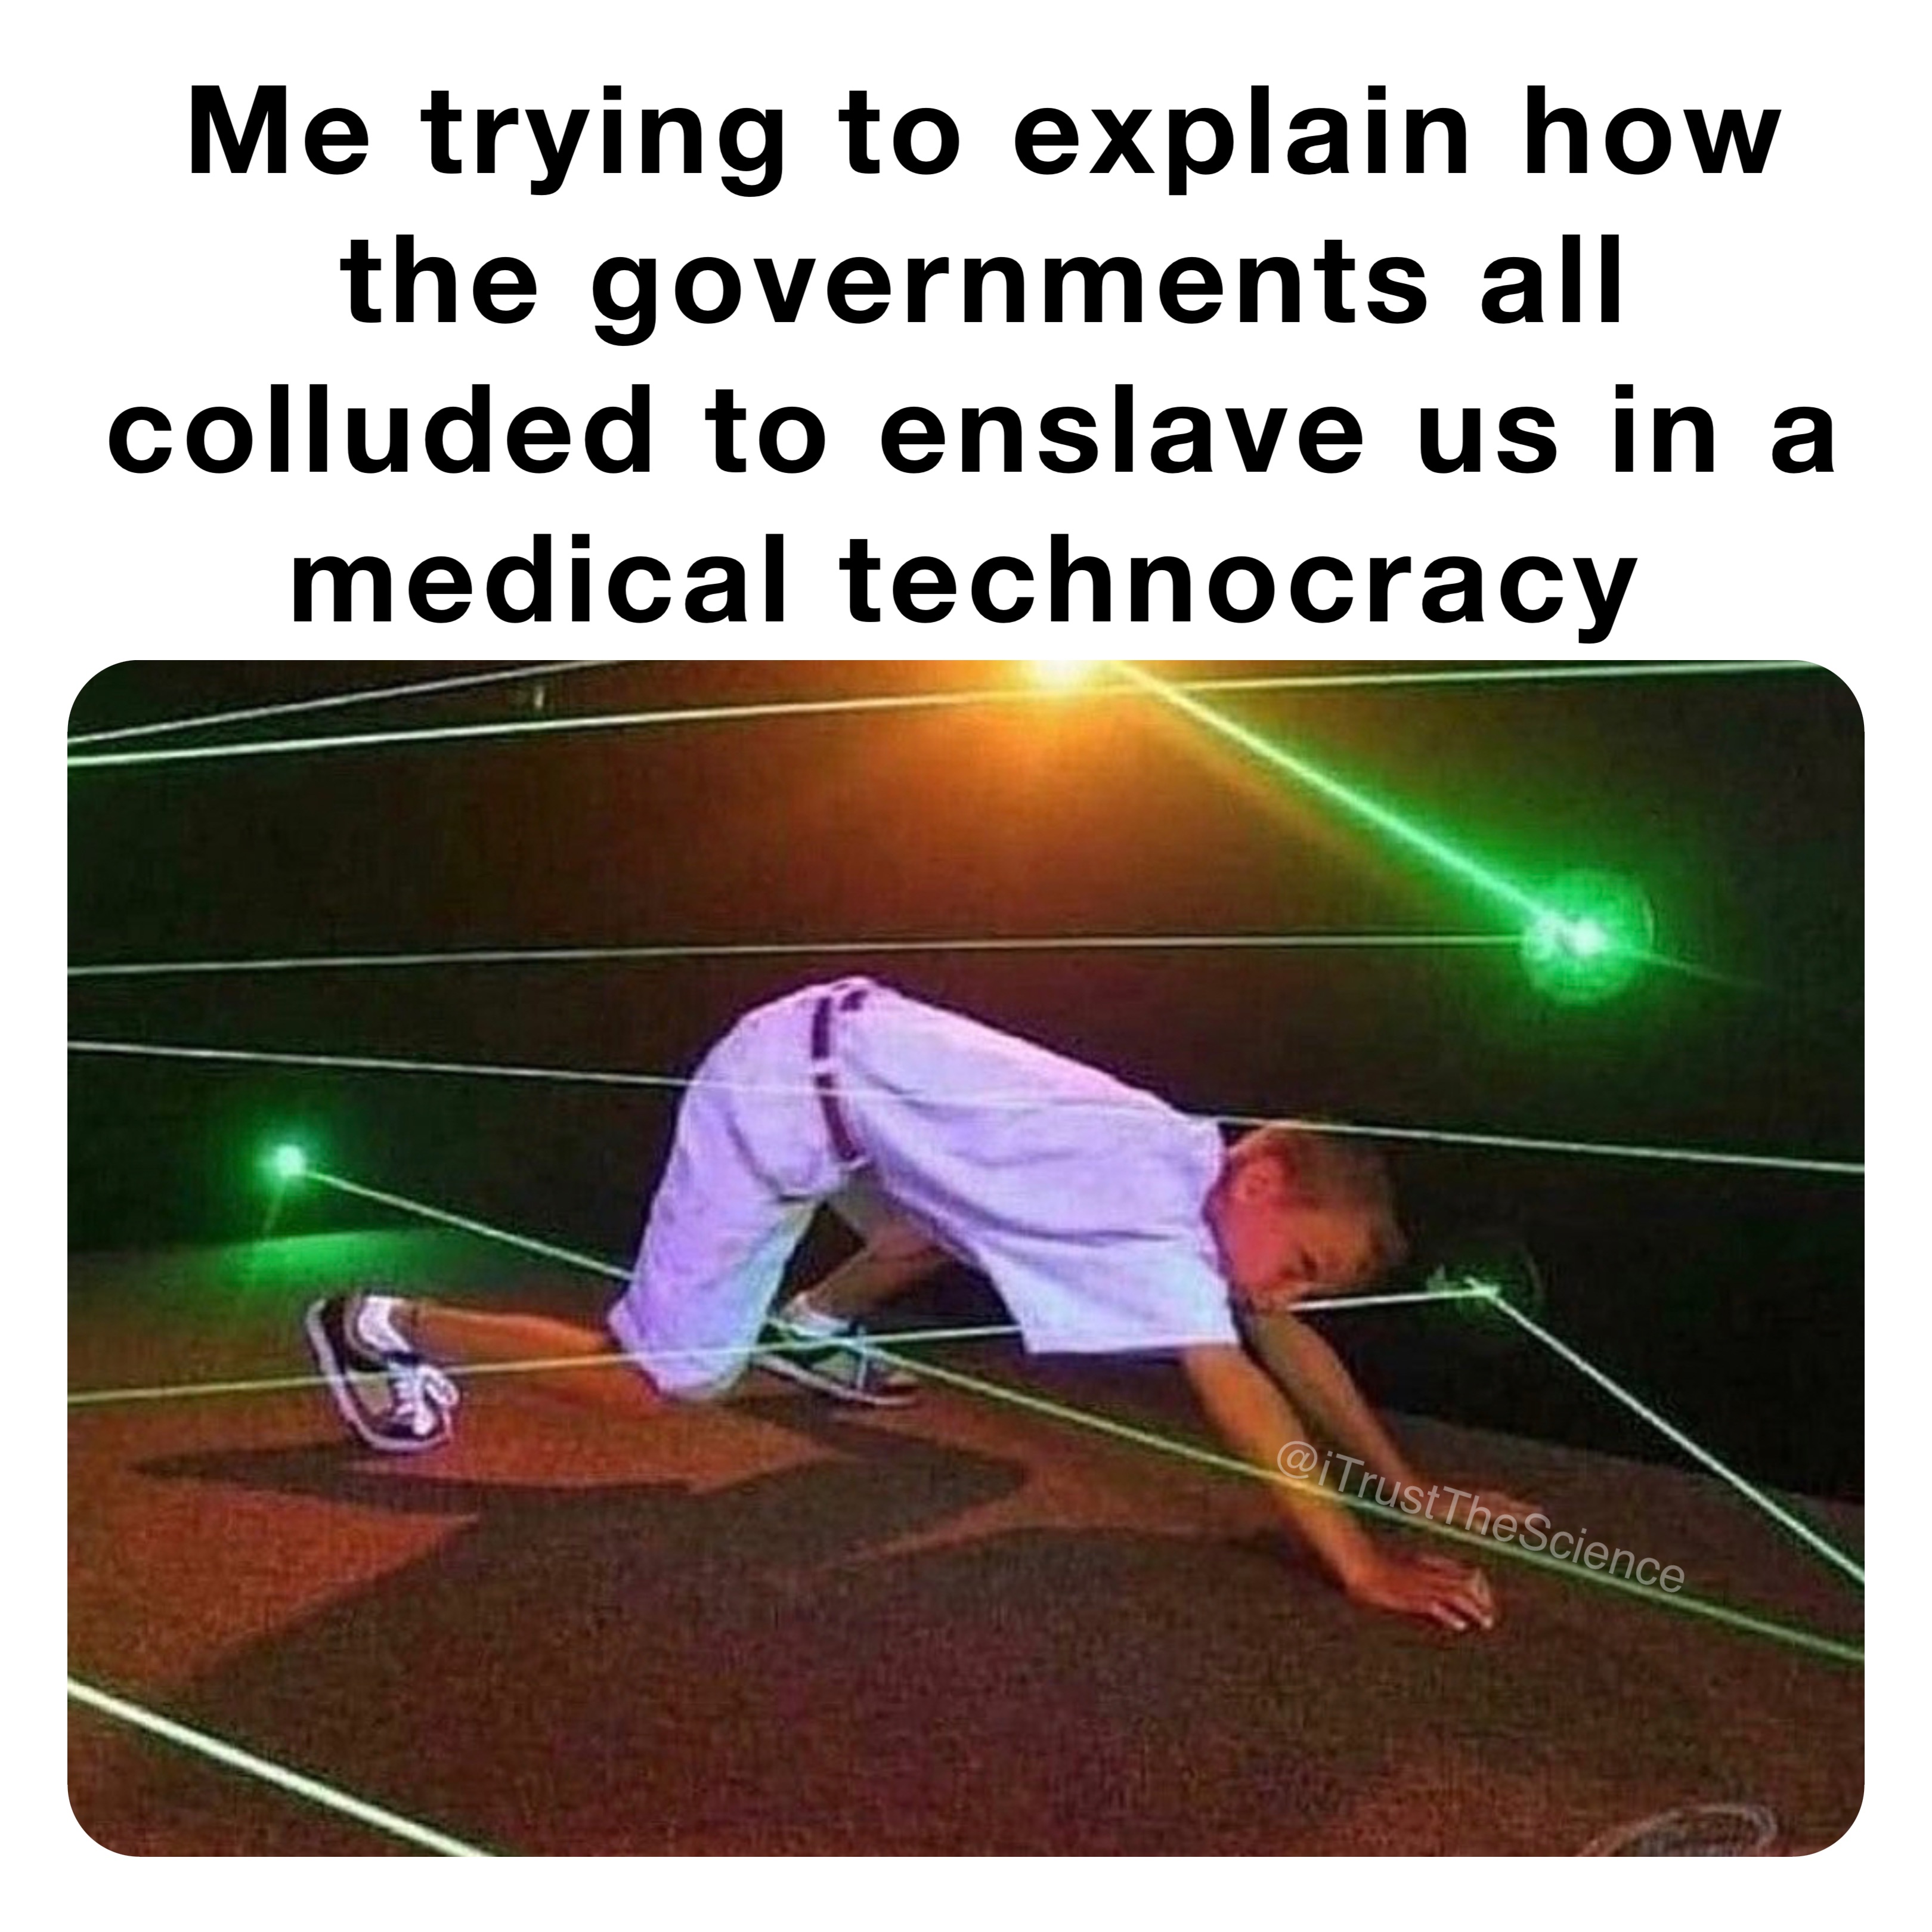 Me trying to explain how the governments all colluded to enslave us in a medical technocracy